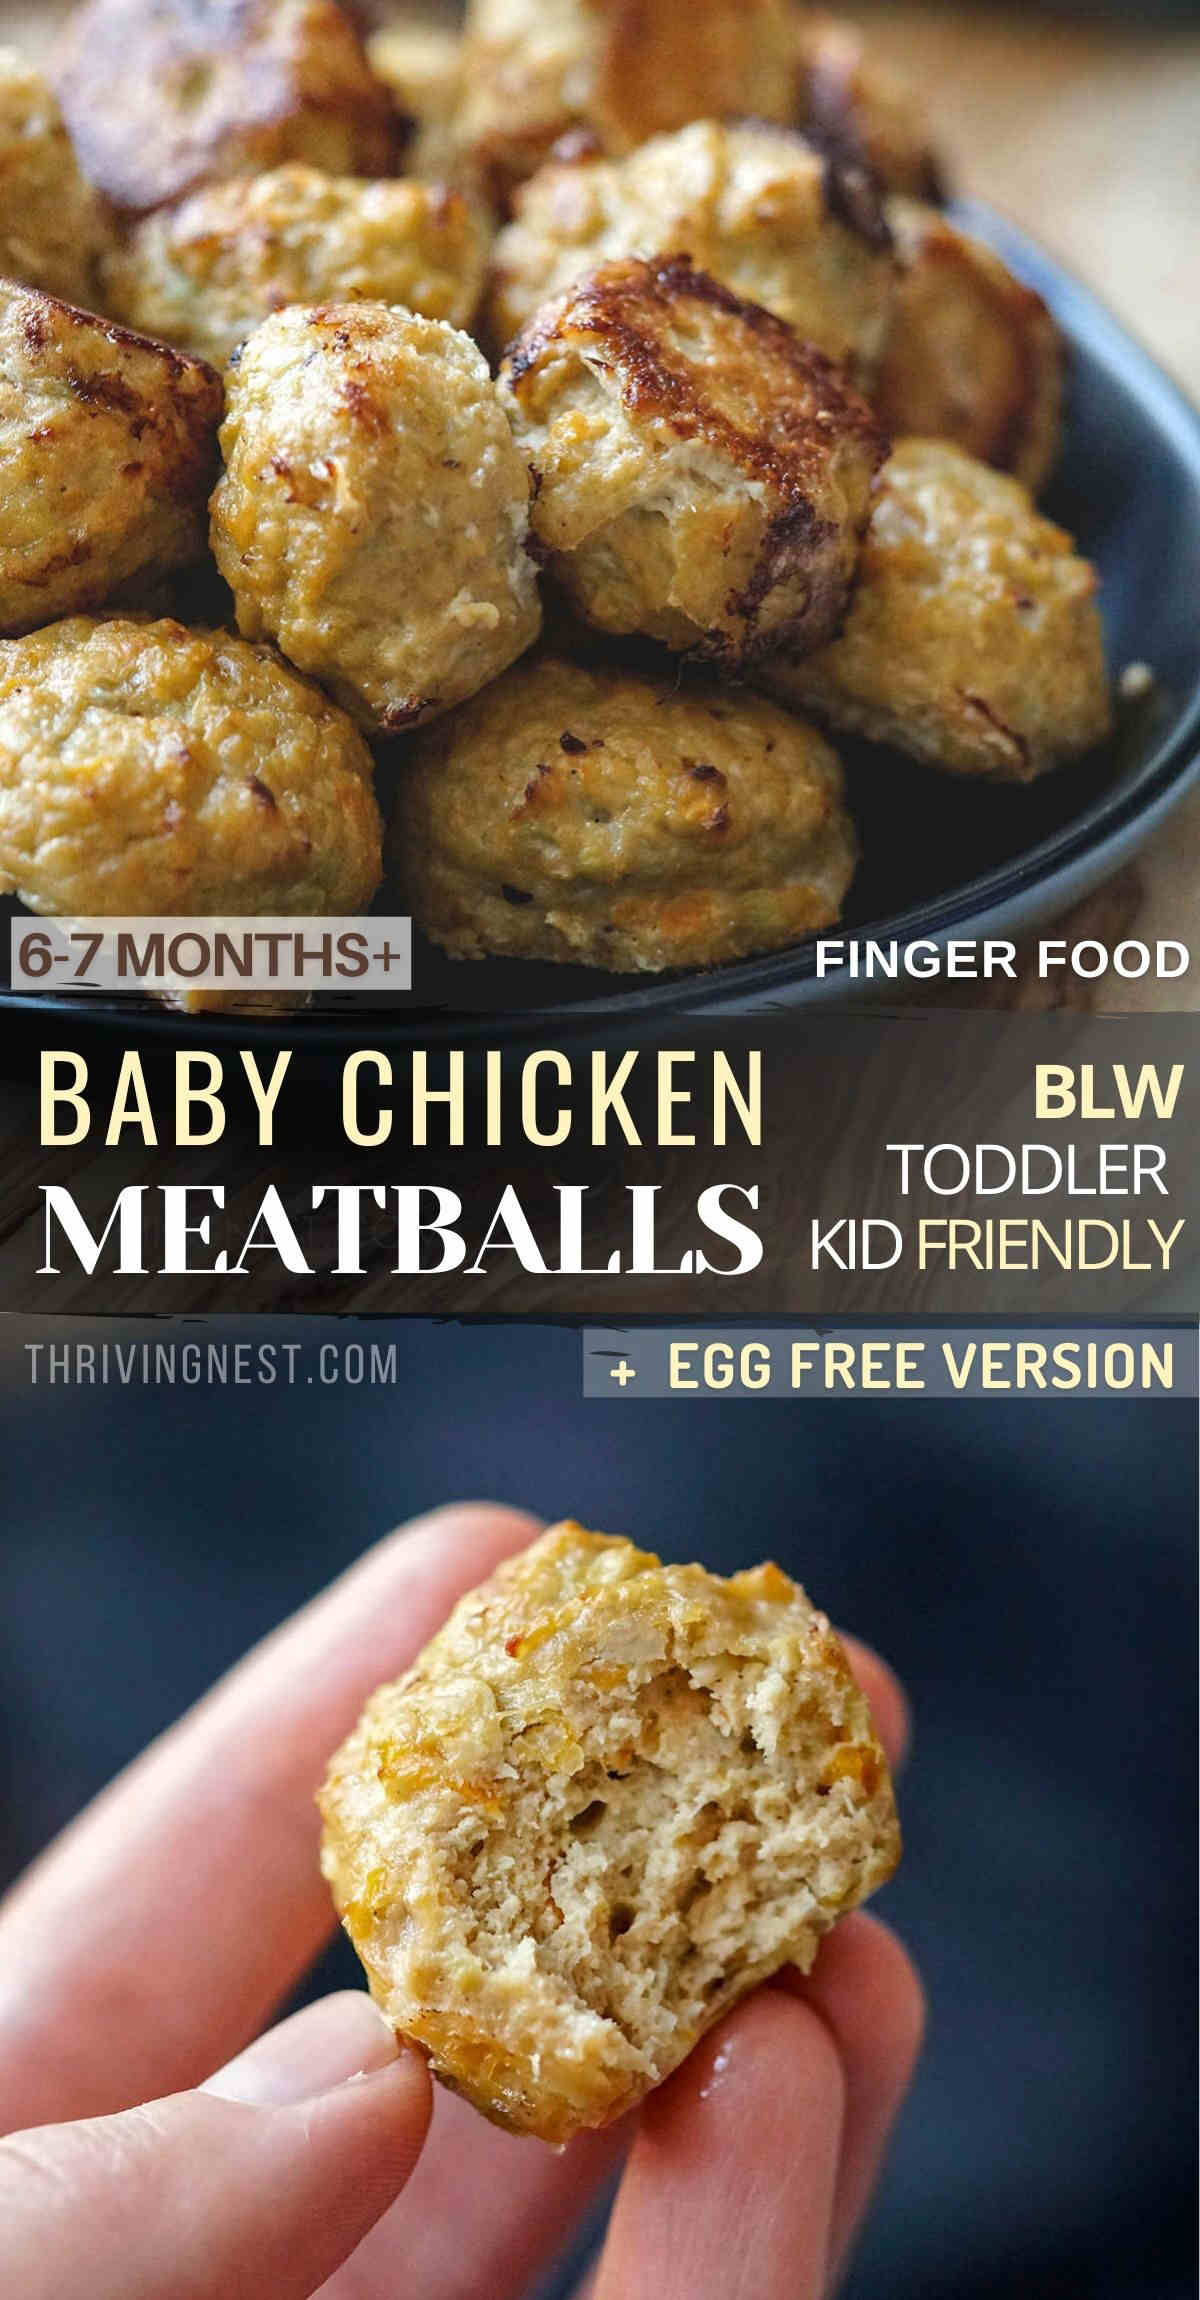 Soft chicken meatballs for baby made with ground chicken, soft avocado, carrot and other veggies, no bread or flour needed. These baby chicken meatballs are suitable for 6-7 month old babies and up, baby led weaning (BLW) as finger food, including toddlers and older kid’s school lunch box. Make egg free chicken meatball for babies without breadcrumbs or cheese. #babychickenmeatballs #babyledweaning #babyfingerfoods #chickenmeatballsforbabies #babychickenrecipe #6months #toddlerchickenmeatballs